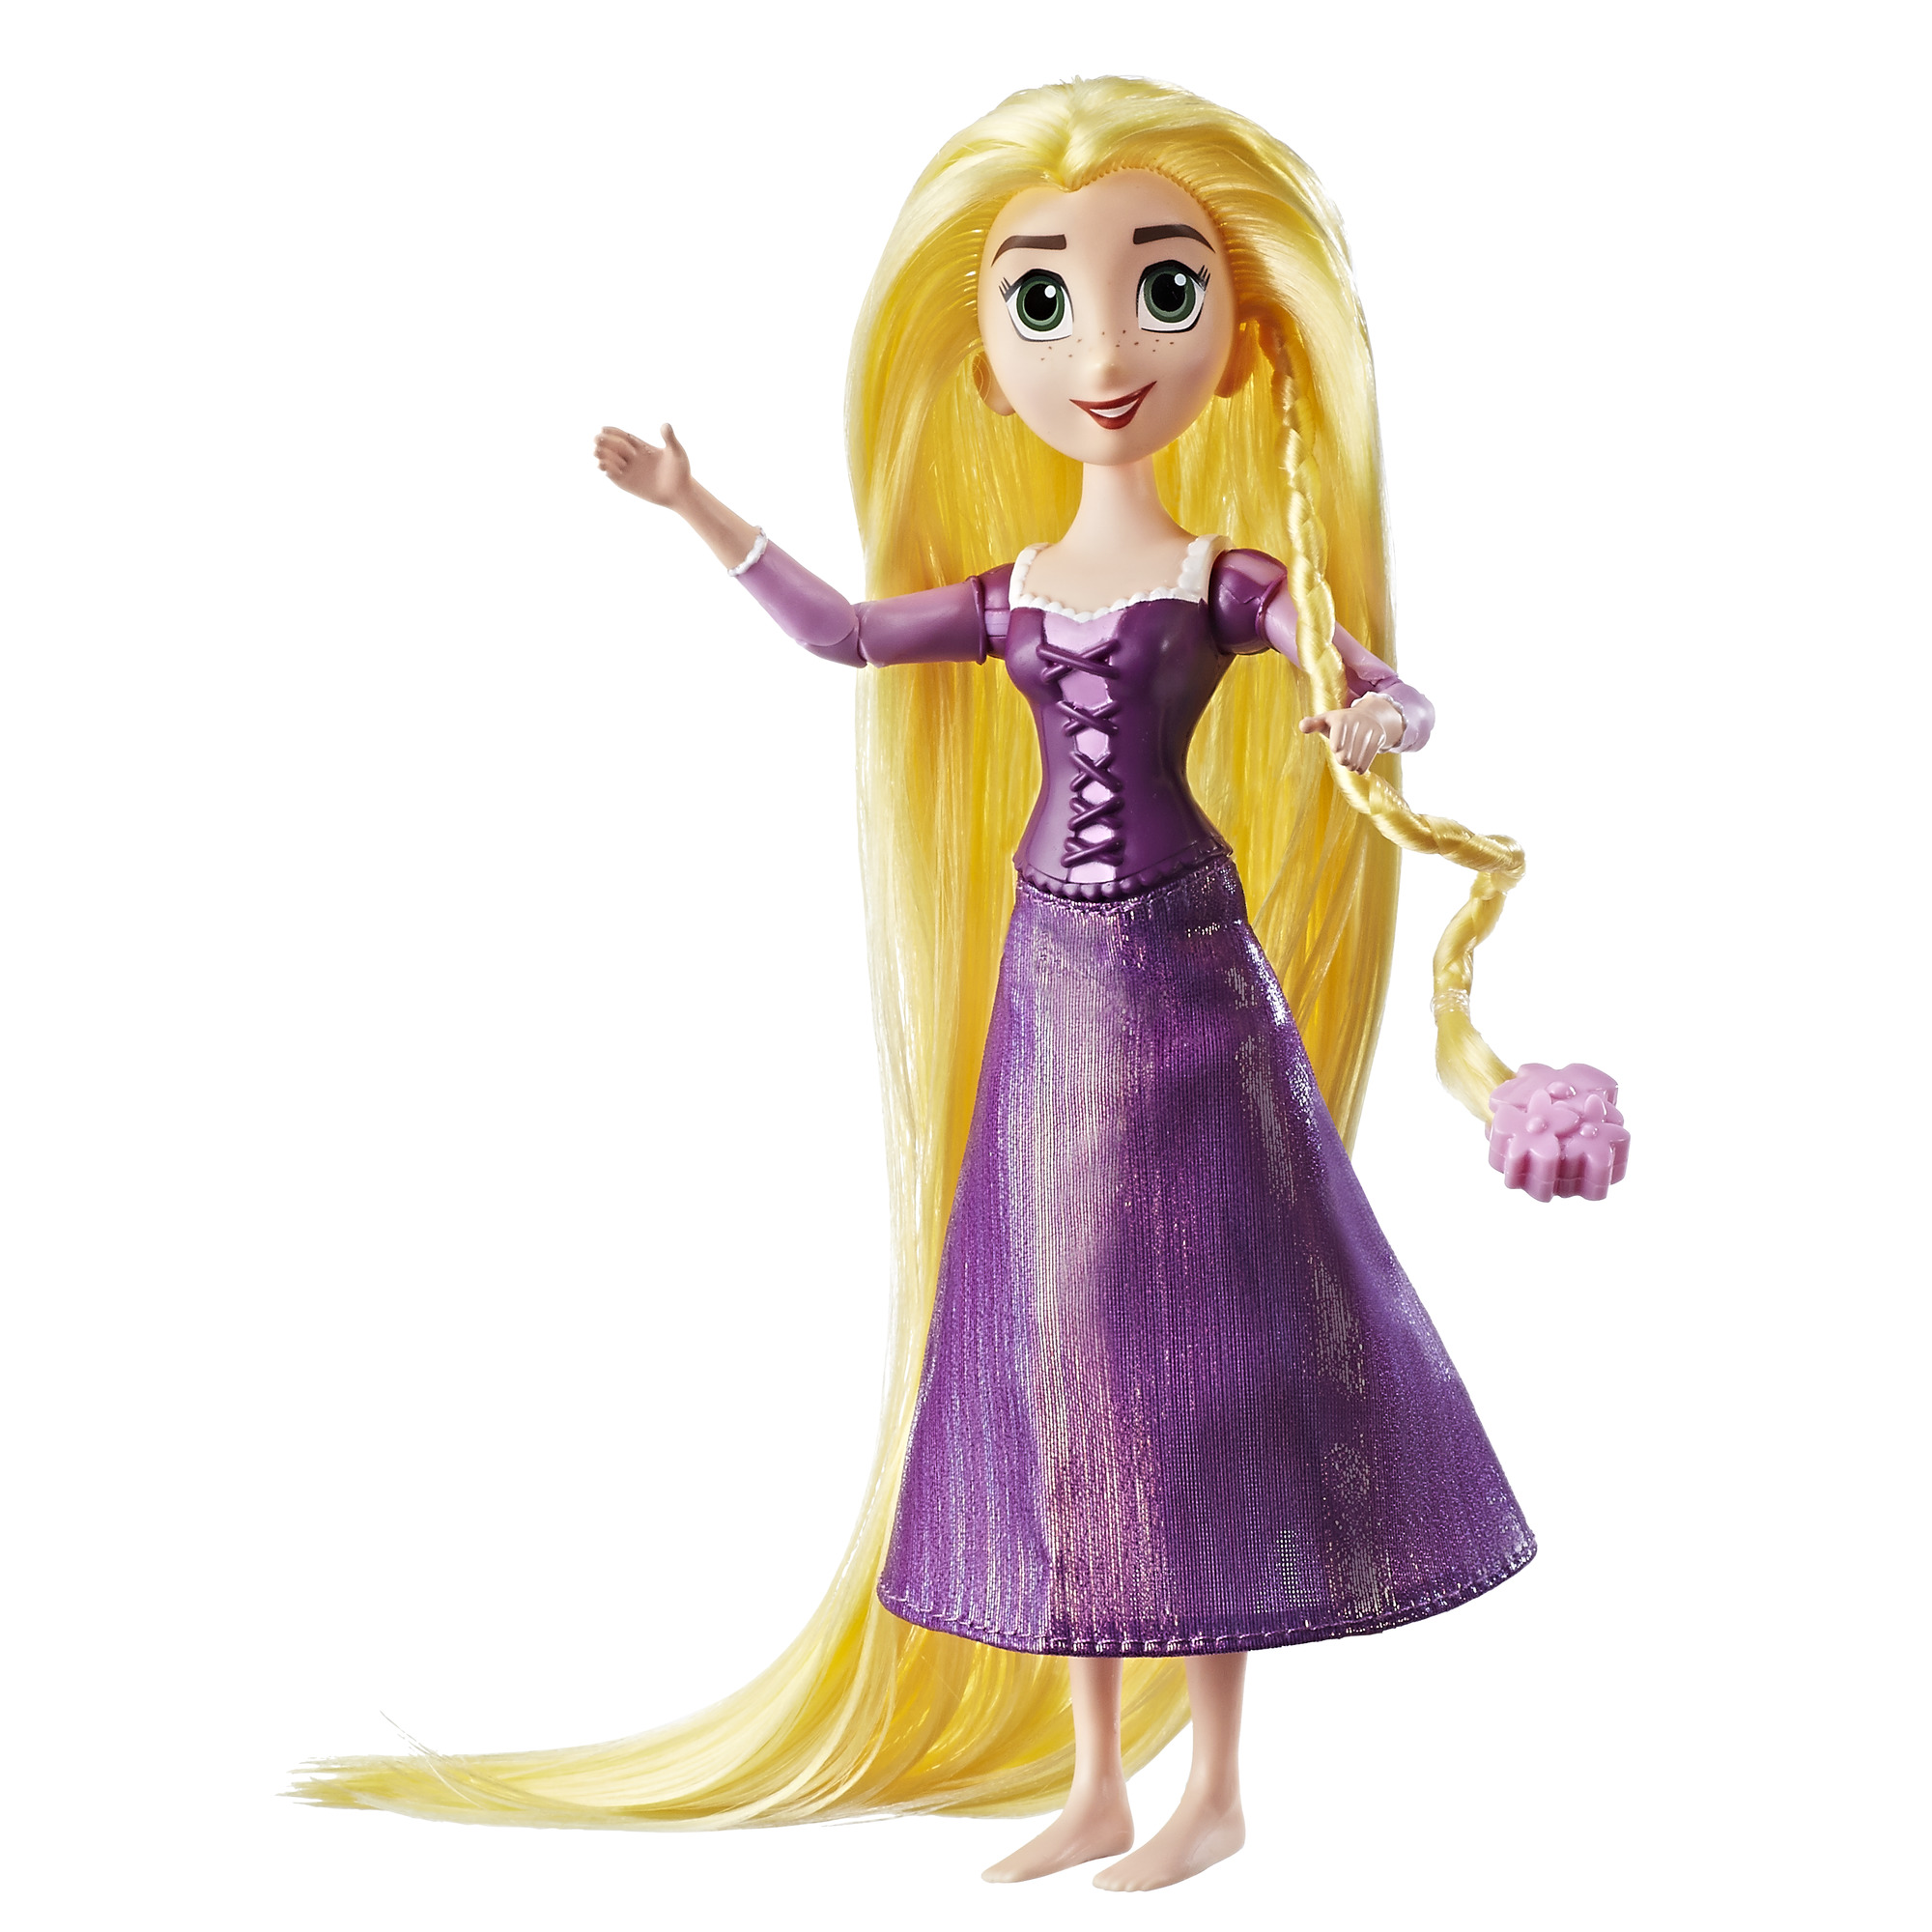 Disney Tangled the Series Rapunzel, ages 3 & up - image 1 of 9